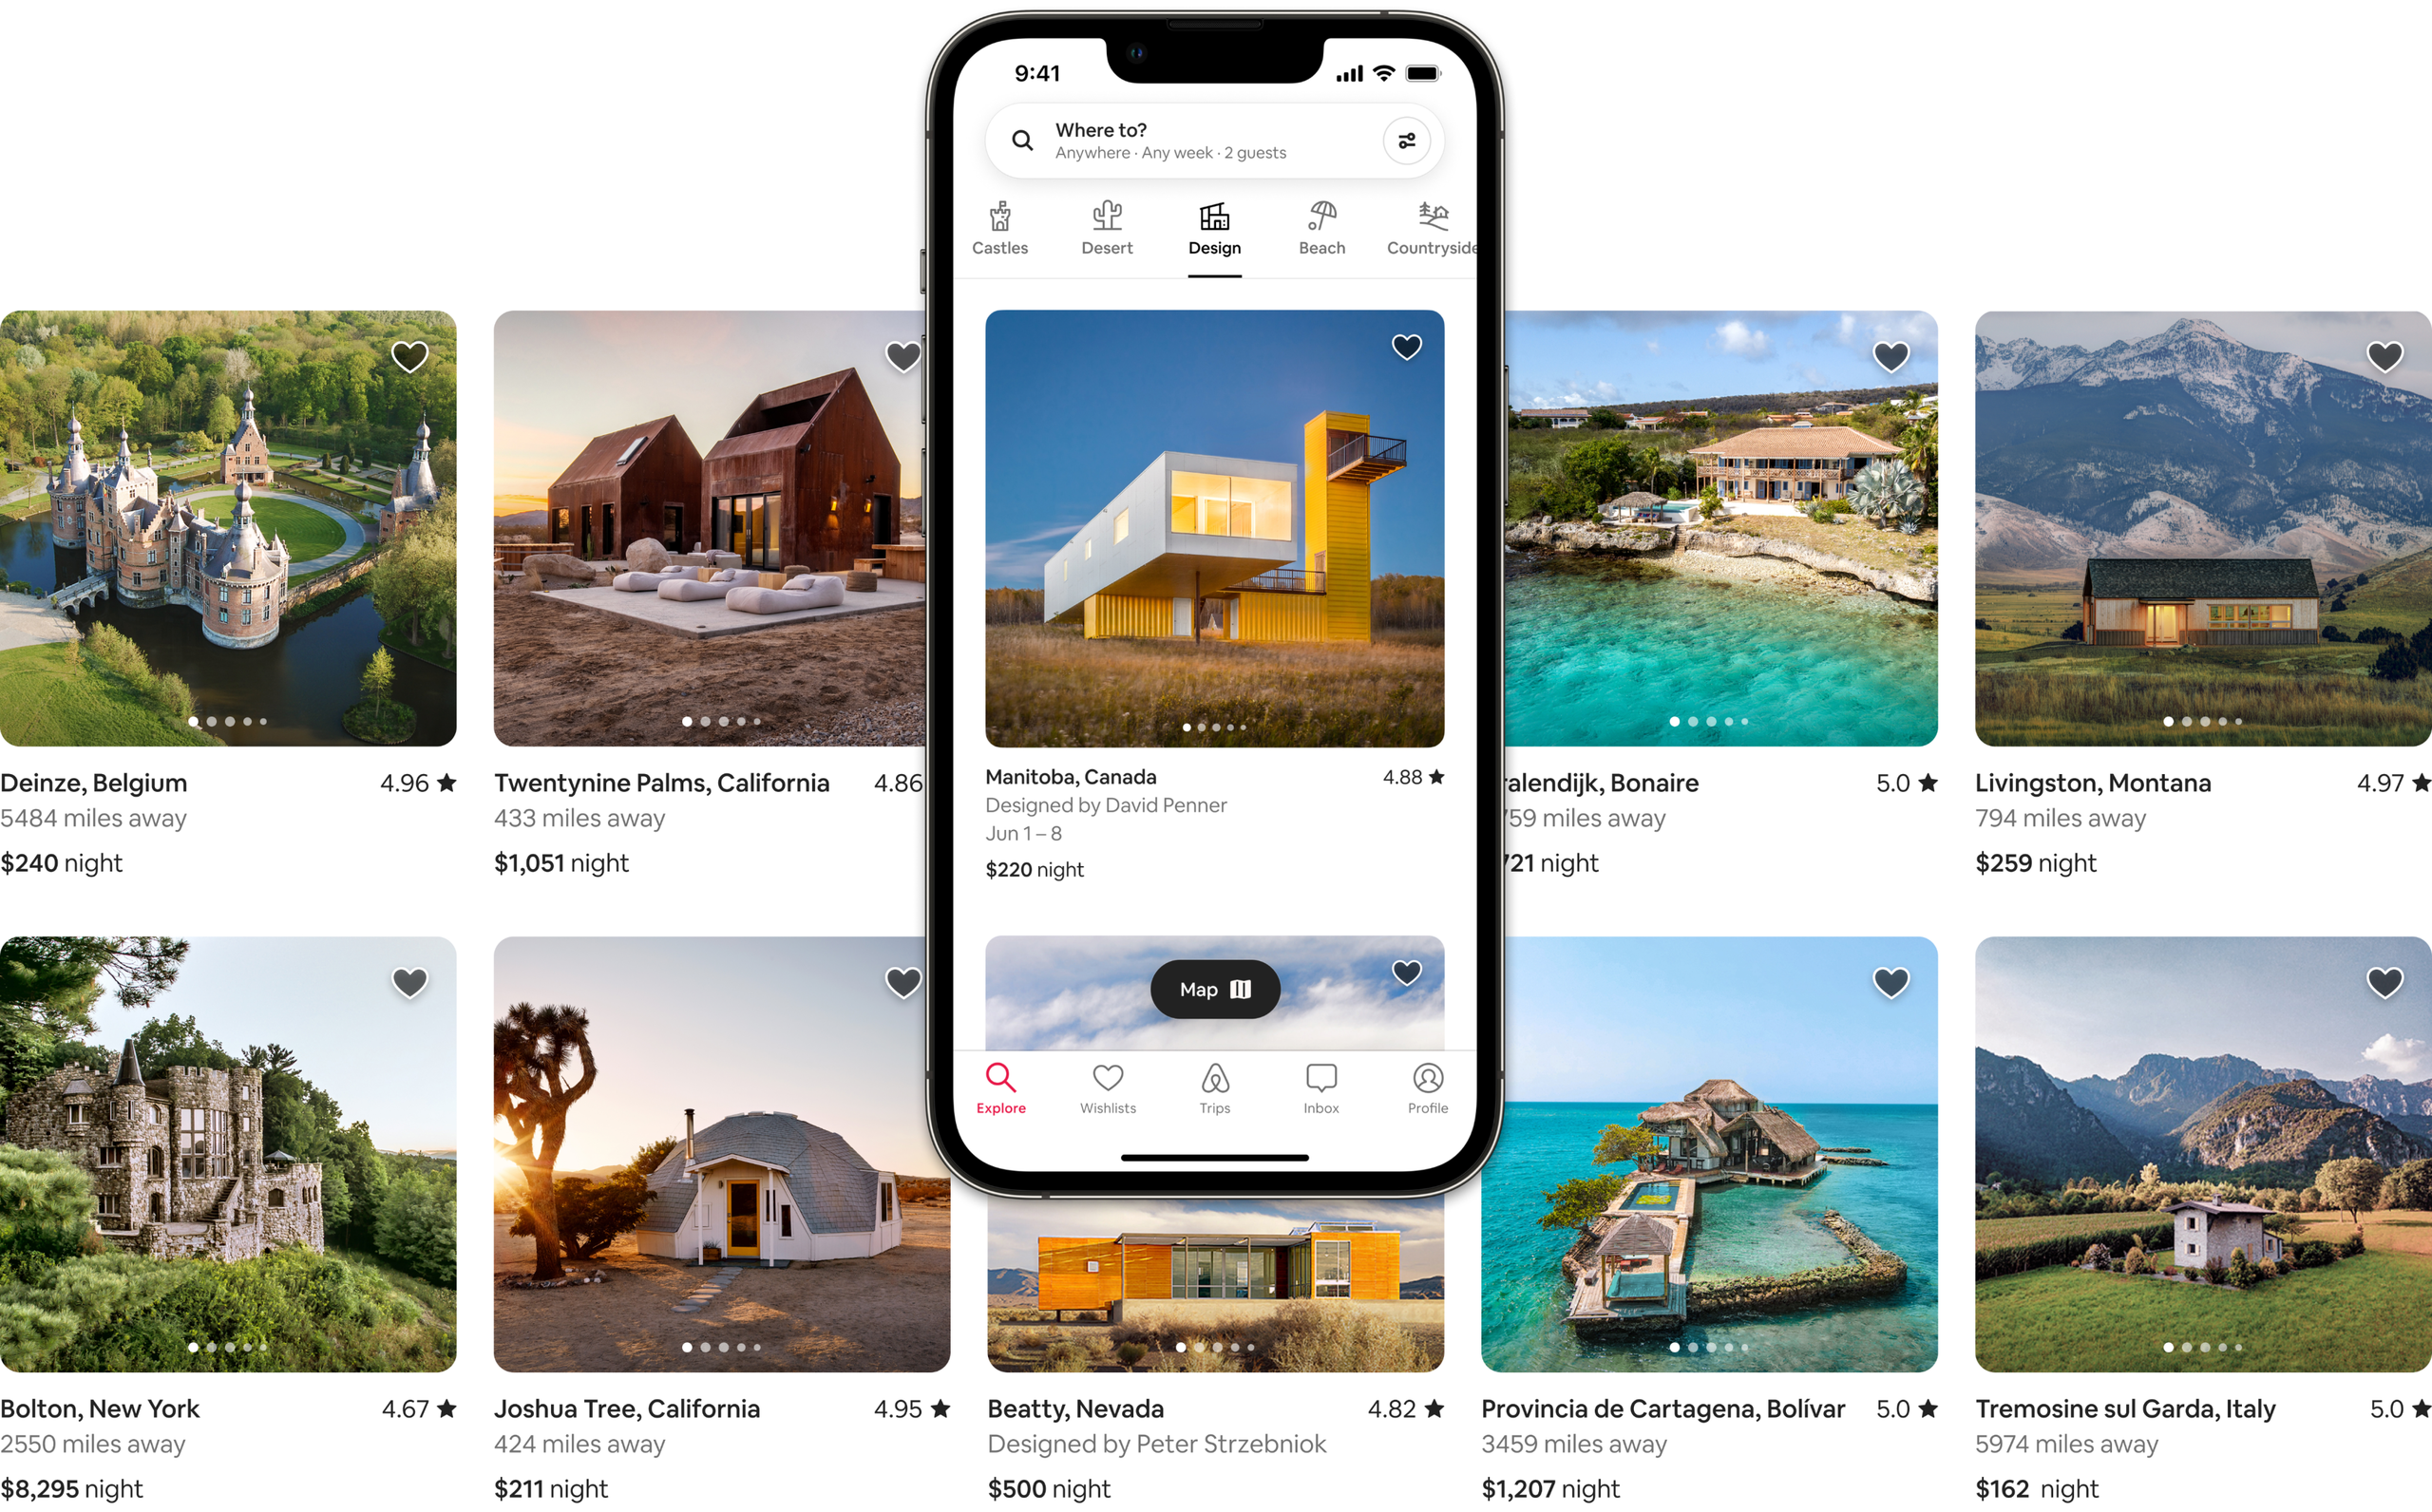 Two rows of beautiful listing photos show homes in Airbnb’s Castle, Desert, Design, Beach and Countryside Categories. One of the listings is shown on a mobile phone screen, demonstrating how the listings would show up in the Airbnb app.